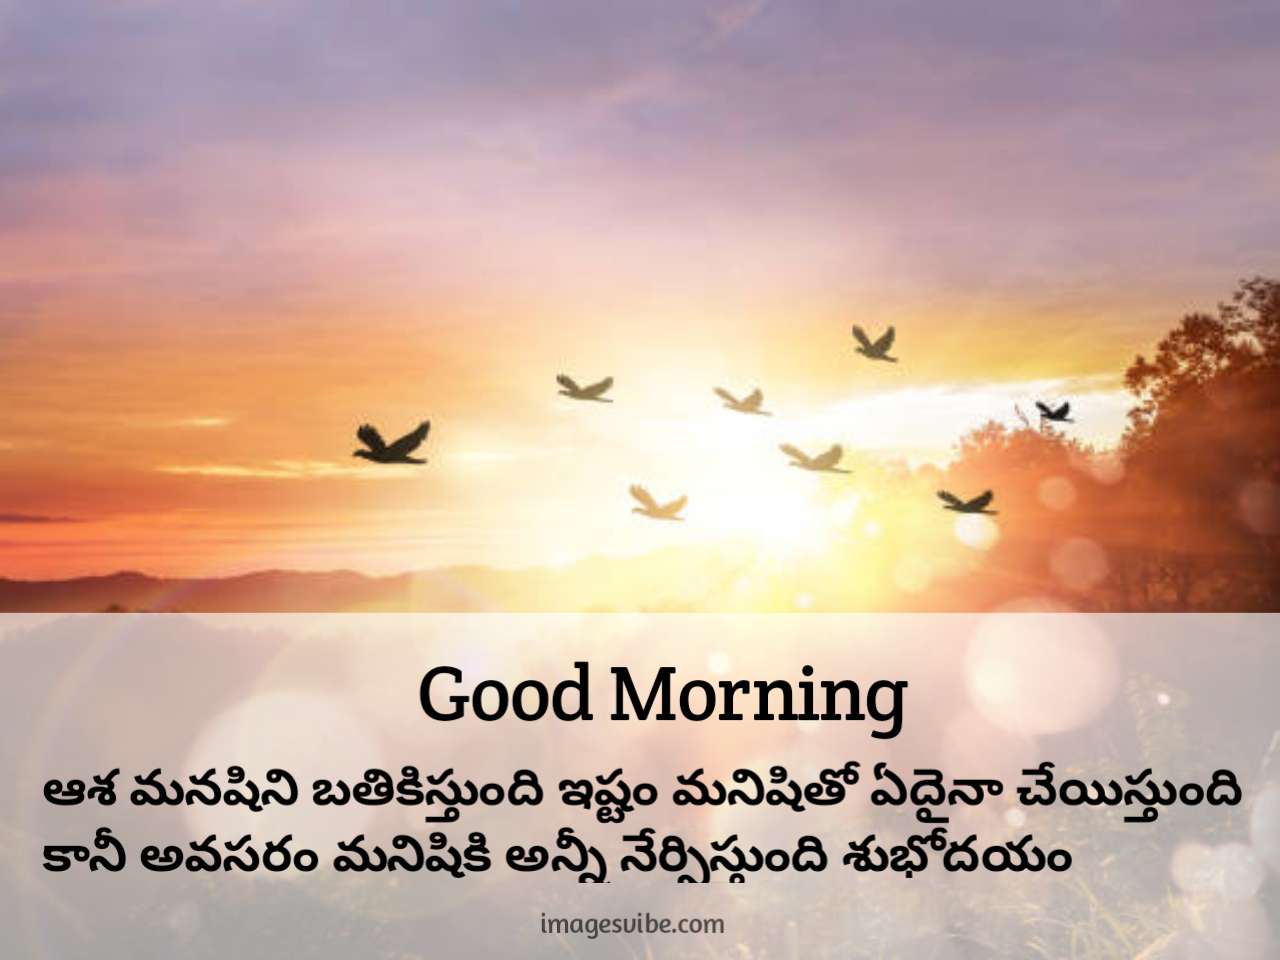 The Ultimate Compilation of Telugu Good Morning Images – Over 999 Exquisite 4K Photos